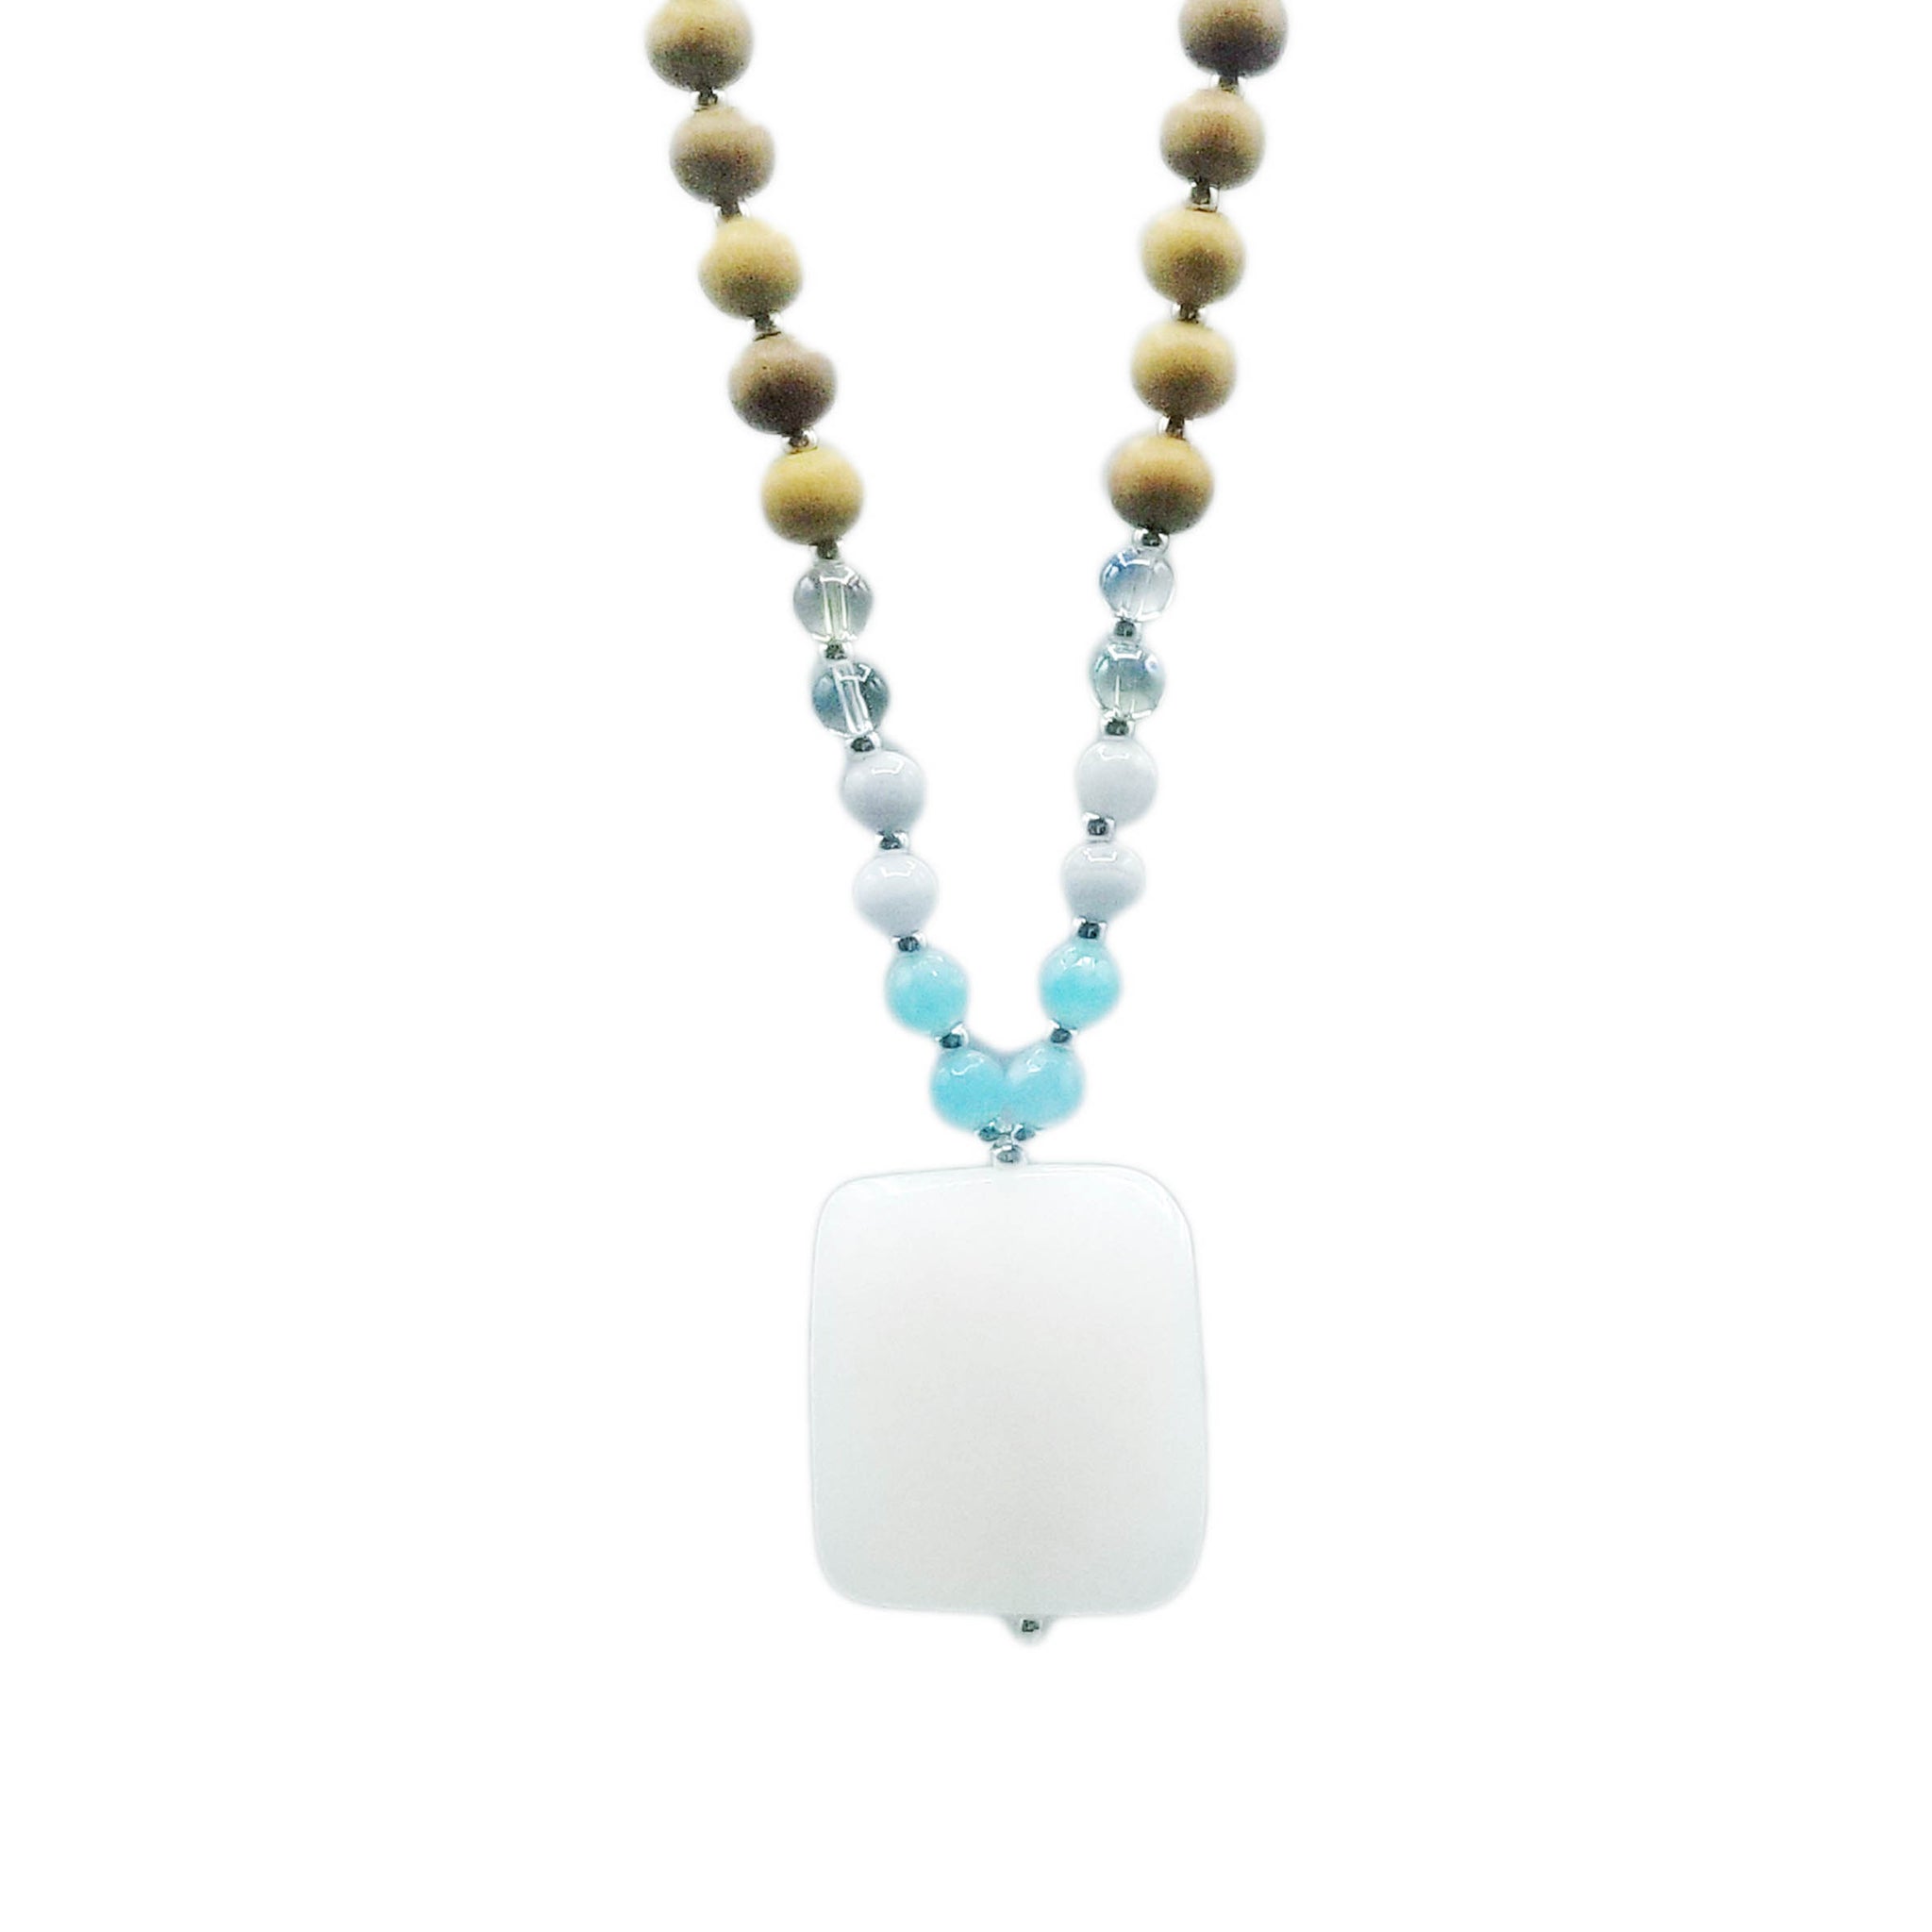 The Air Element Mala Necklace.